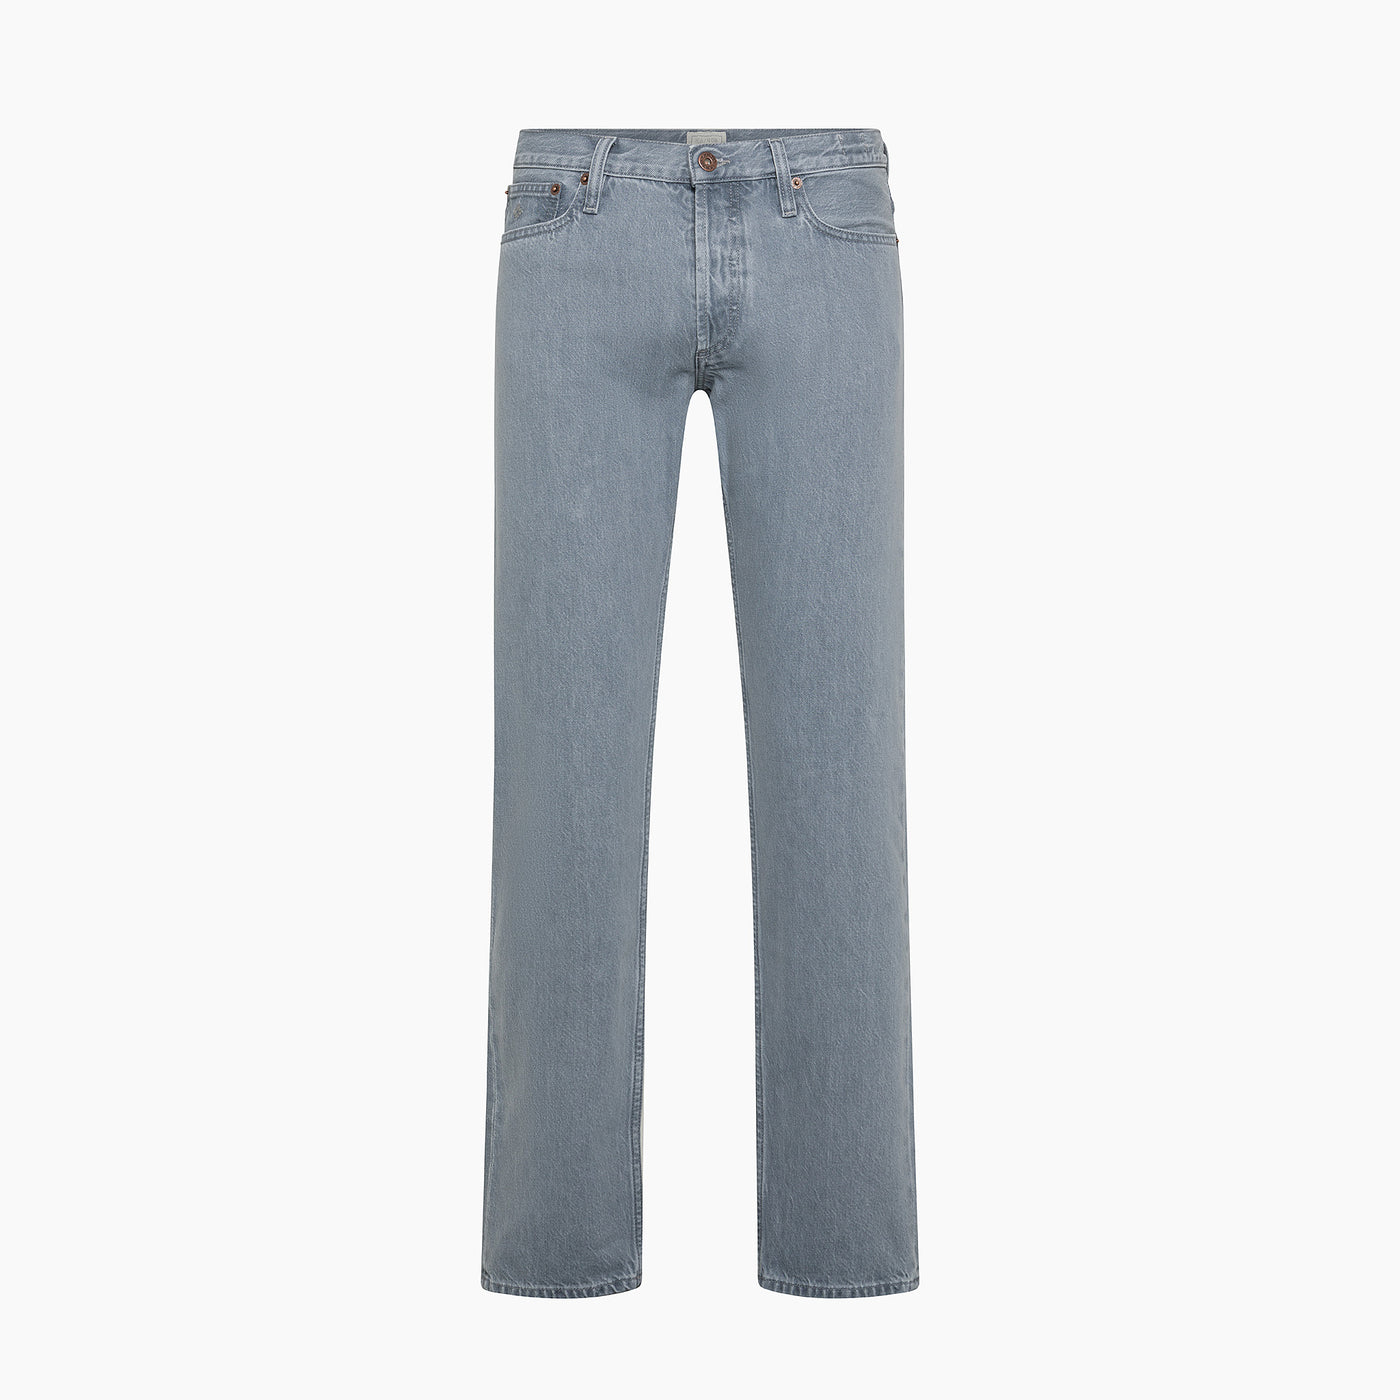 Legacy jeans in stone washed denim